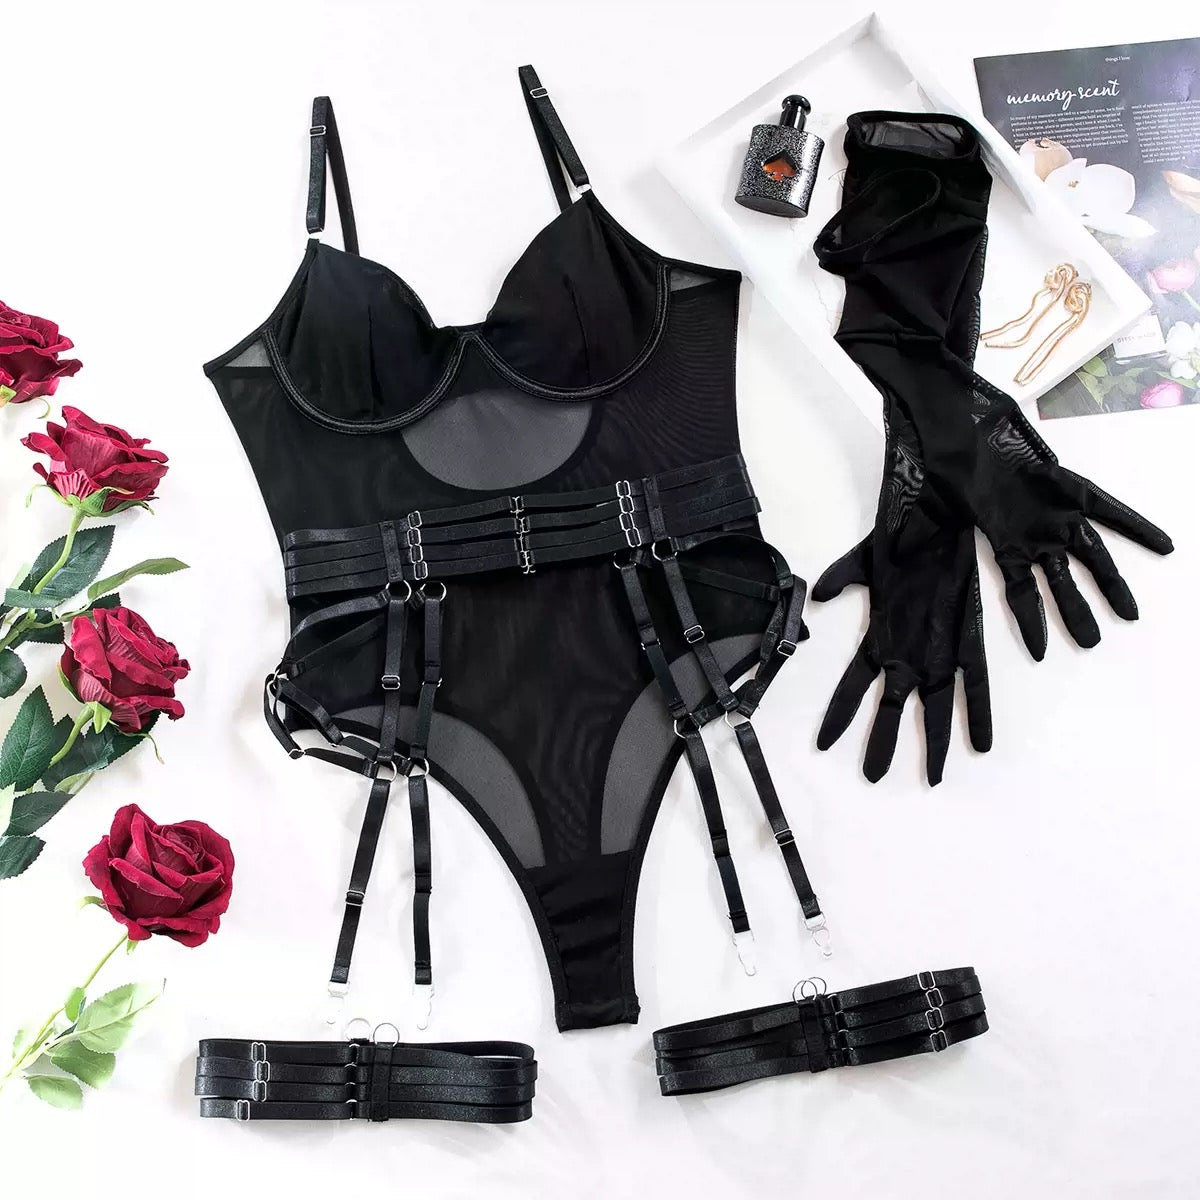 Roderno Mesh Intimate Wear Bodysuit With Thigh Cuffs And Gloves